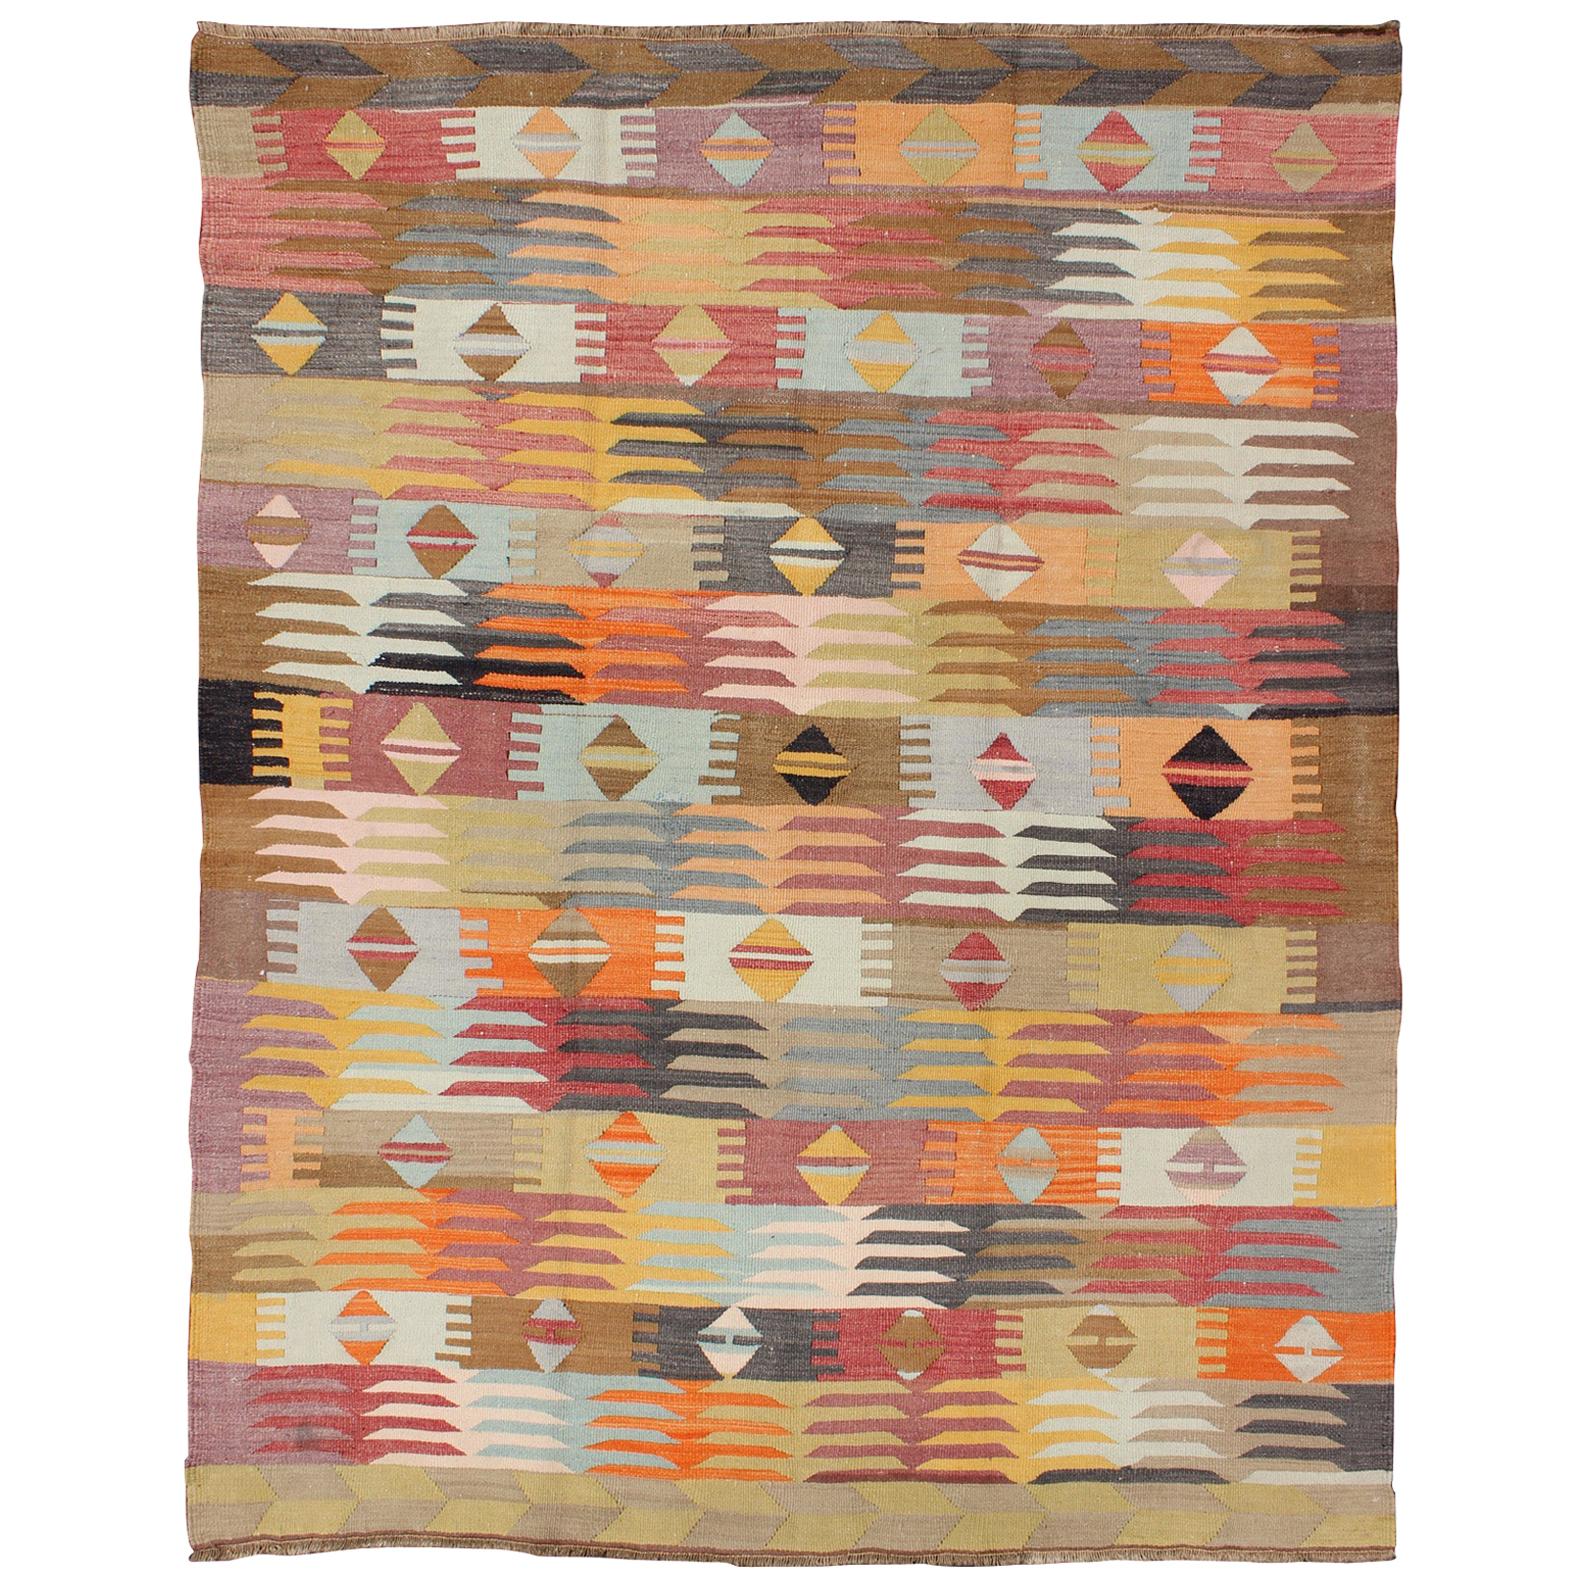 Colorful Vintage Turkish Kilim with All-Over Latching Design & Geometric Shapes